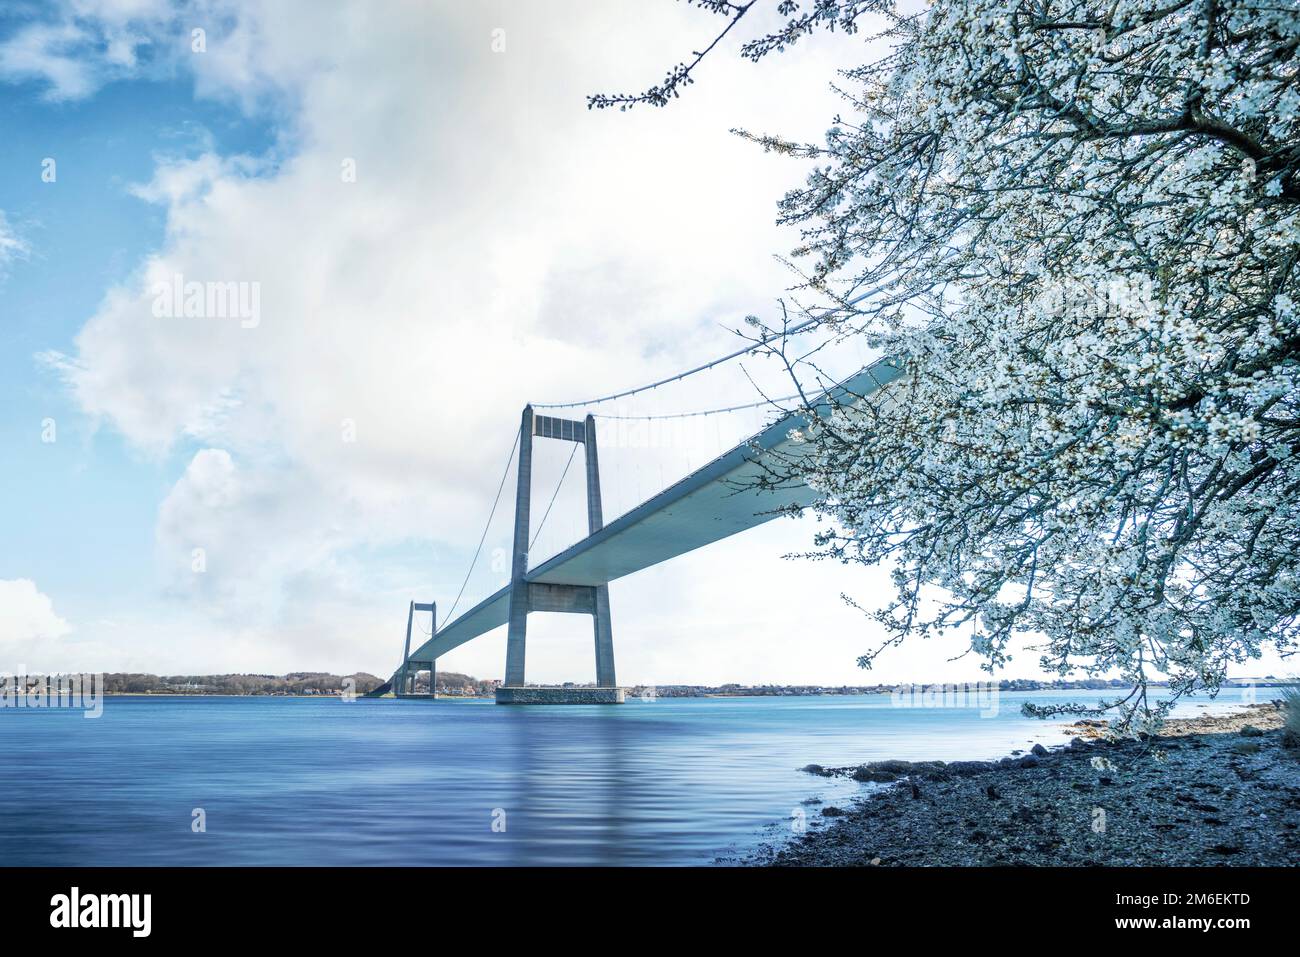 Beautiful bridge over calm waters in the springtime with a tree blooming with white flowers Stock Photo